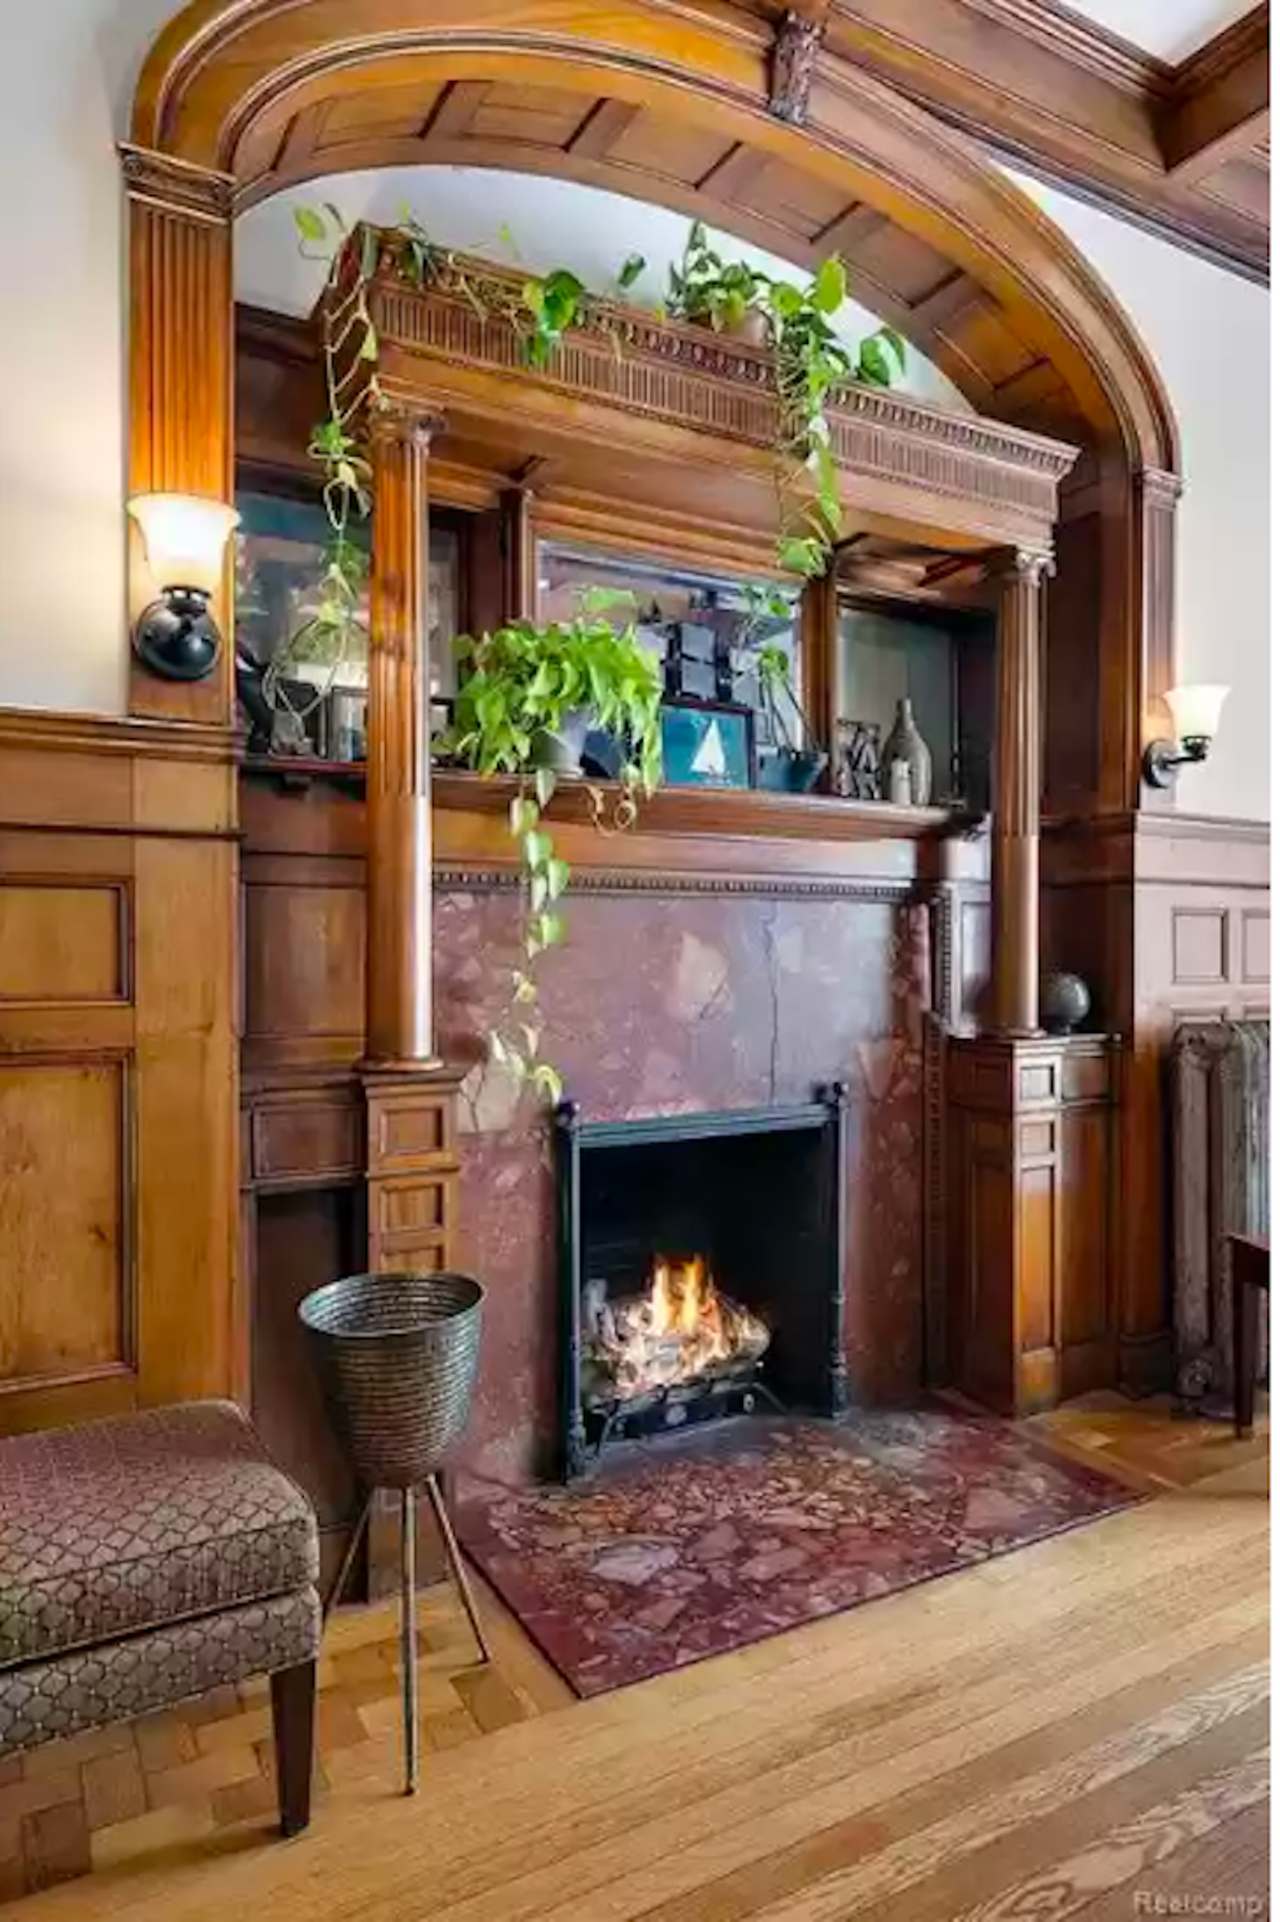 This $3.7 million historic Detroit home that once belonged to David Whitney is on the market